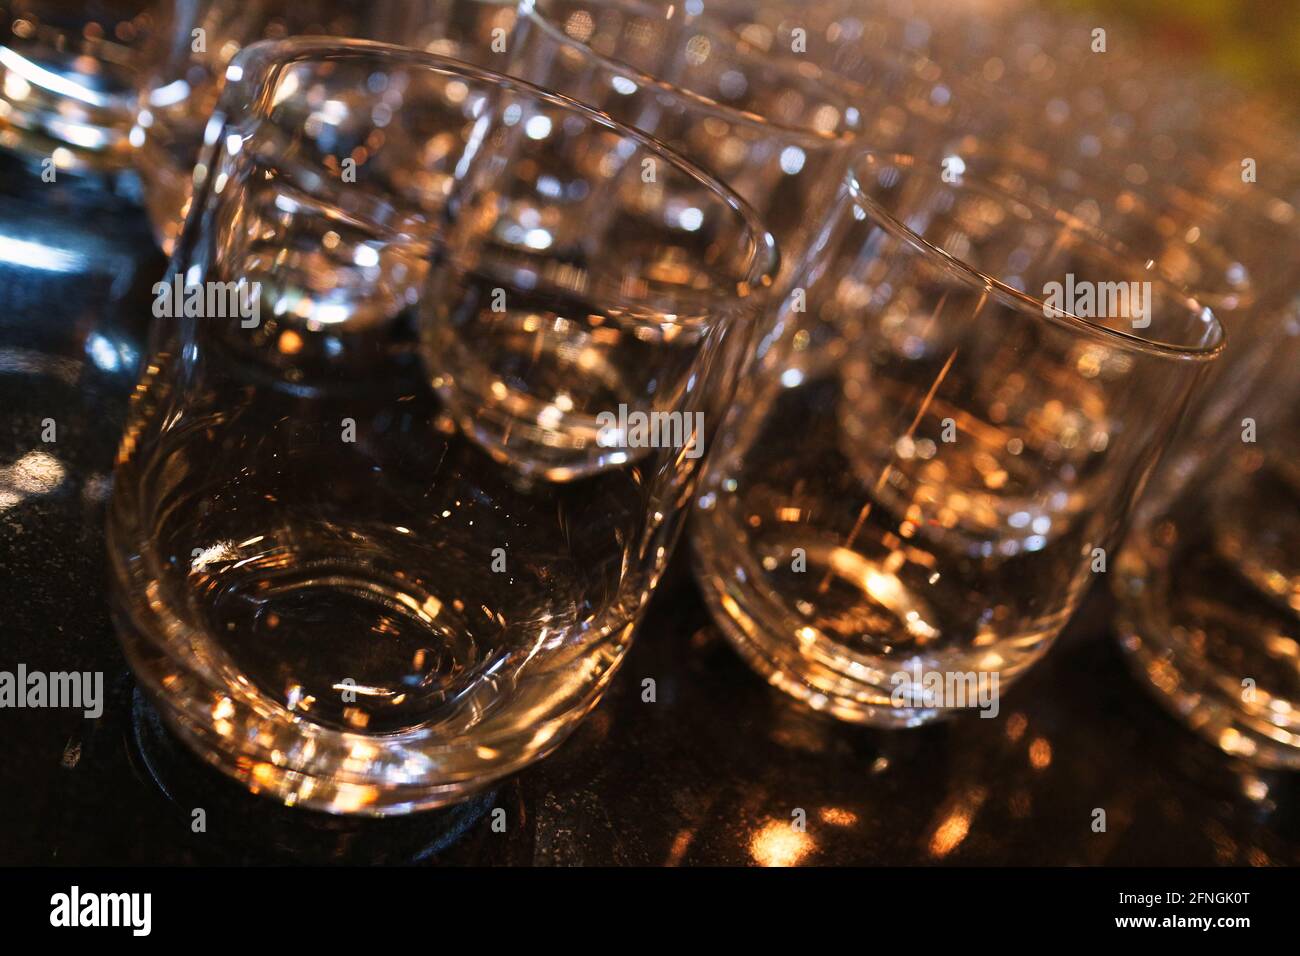 Sparkling drinks glasses in a row Stock Photo